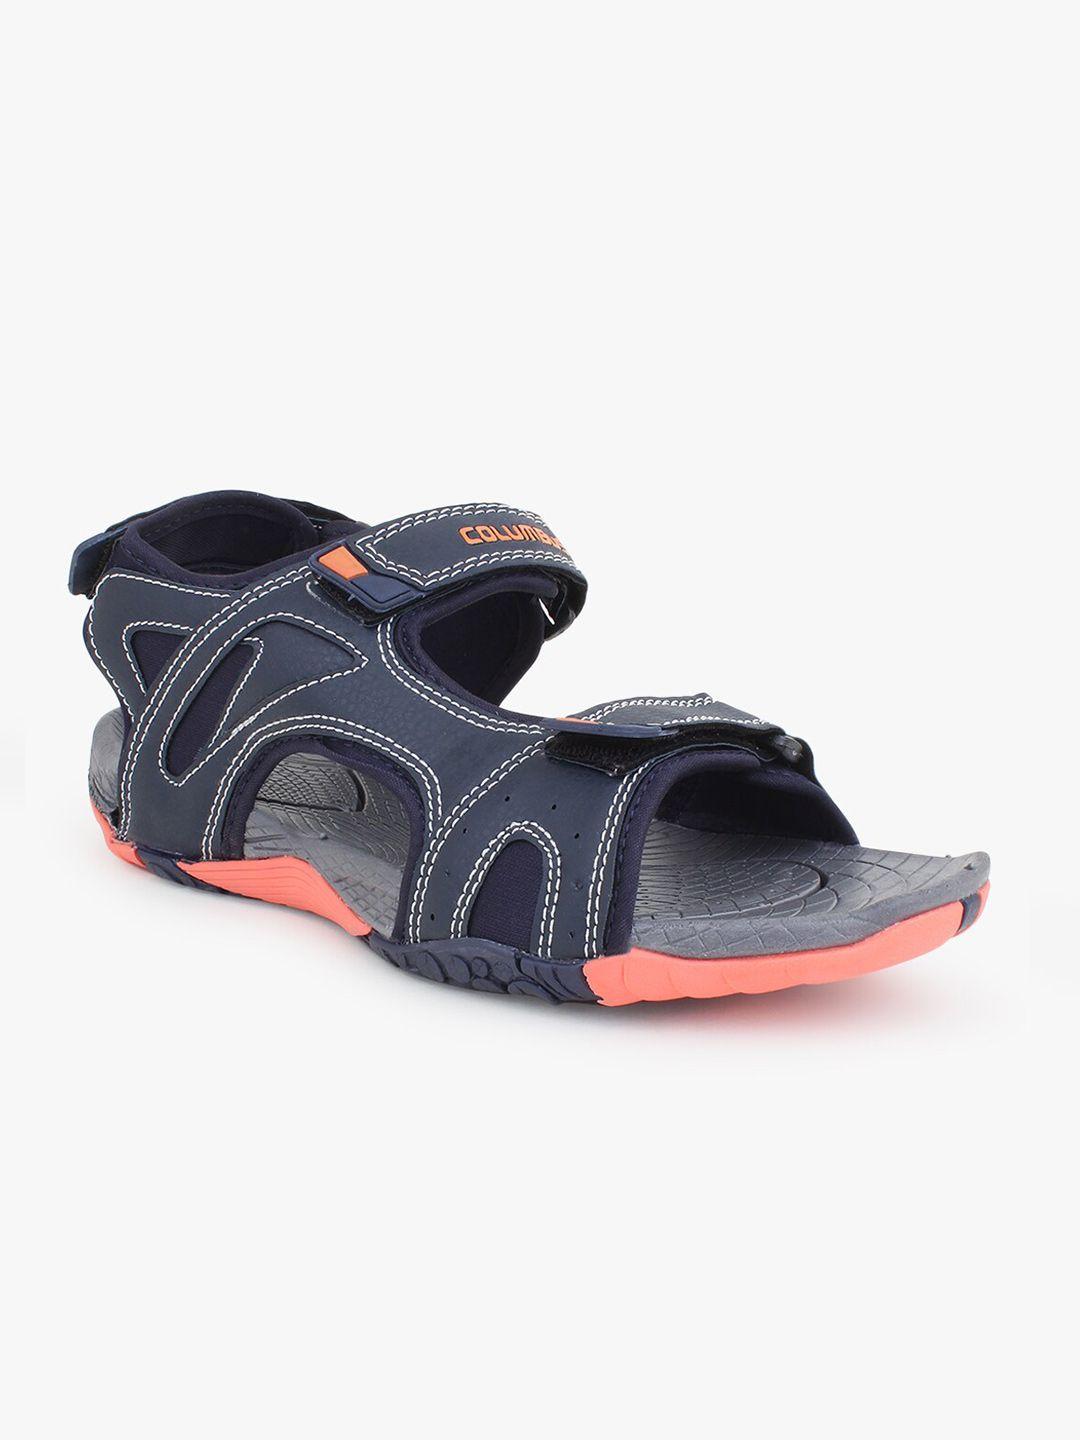 columbus-men-navy-blue-&-coral-printed-synthetic-sports-sandals